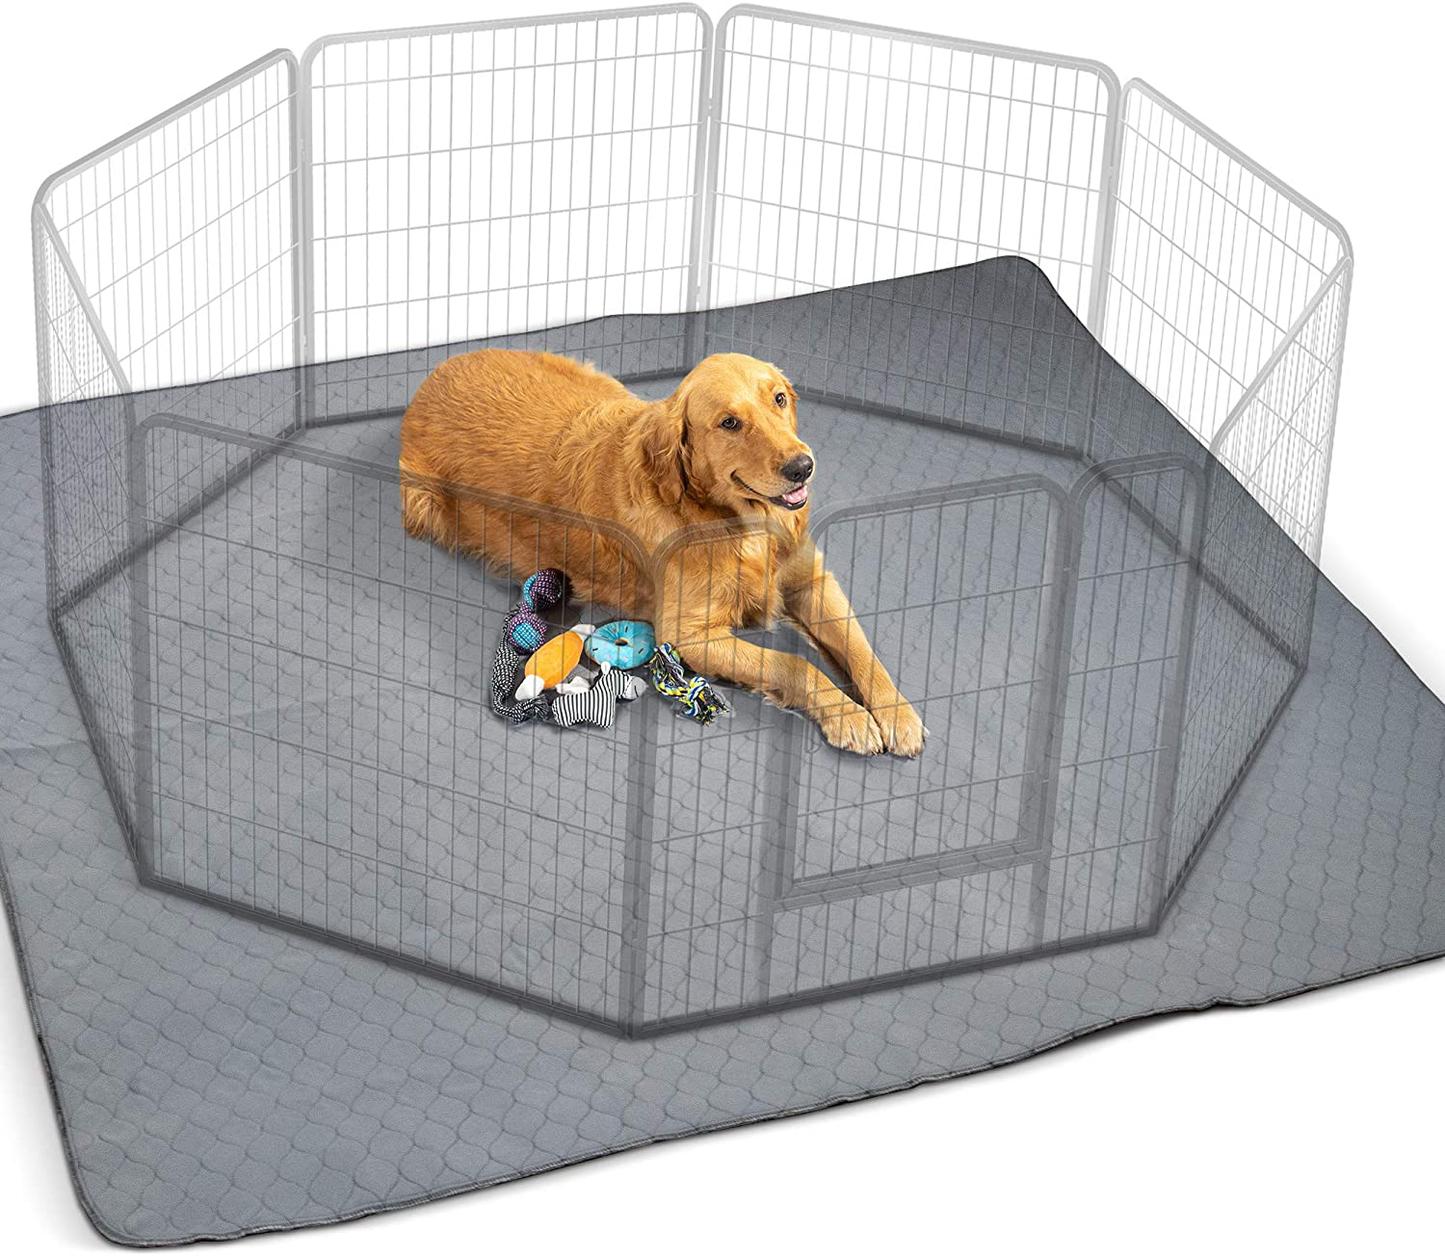 Waterproof XXL Puppy Whelping Pad 72"X72" - Our Washable Super Absorption Pee Pad Is Perfect for Your Exercise Playpen or Whelping Box - the Durable Non Slip Floor Mat for Dogs